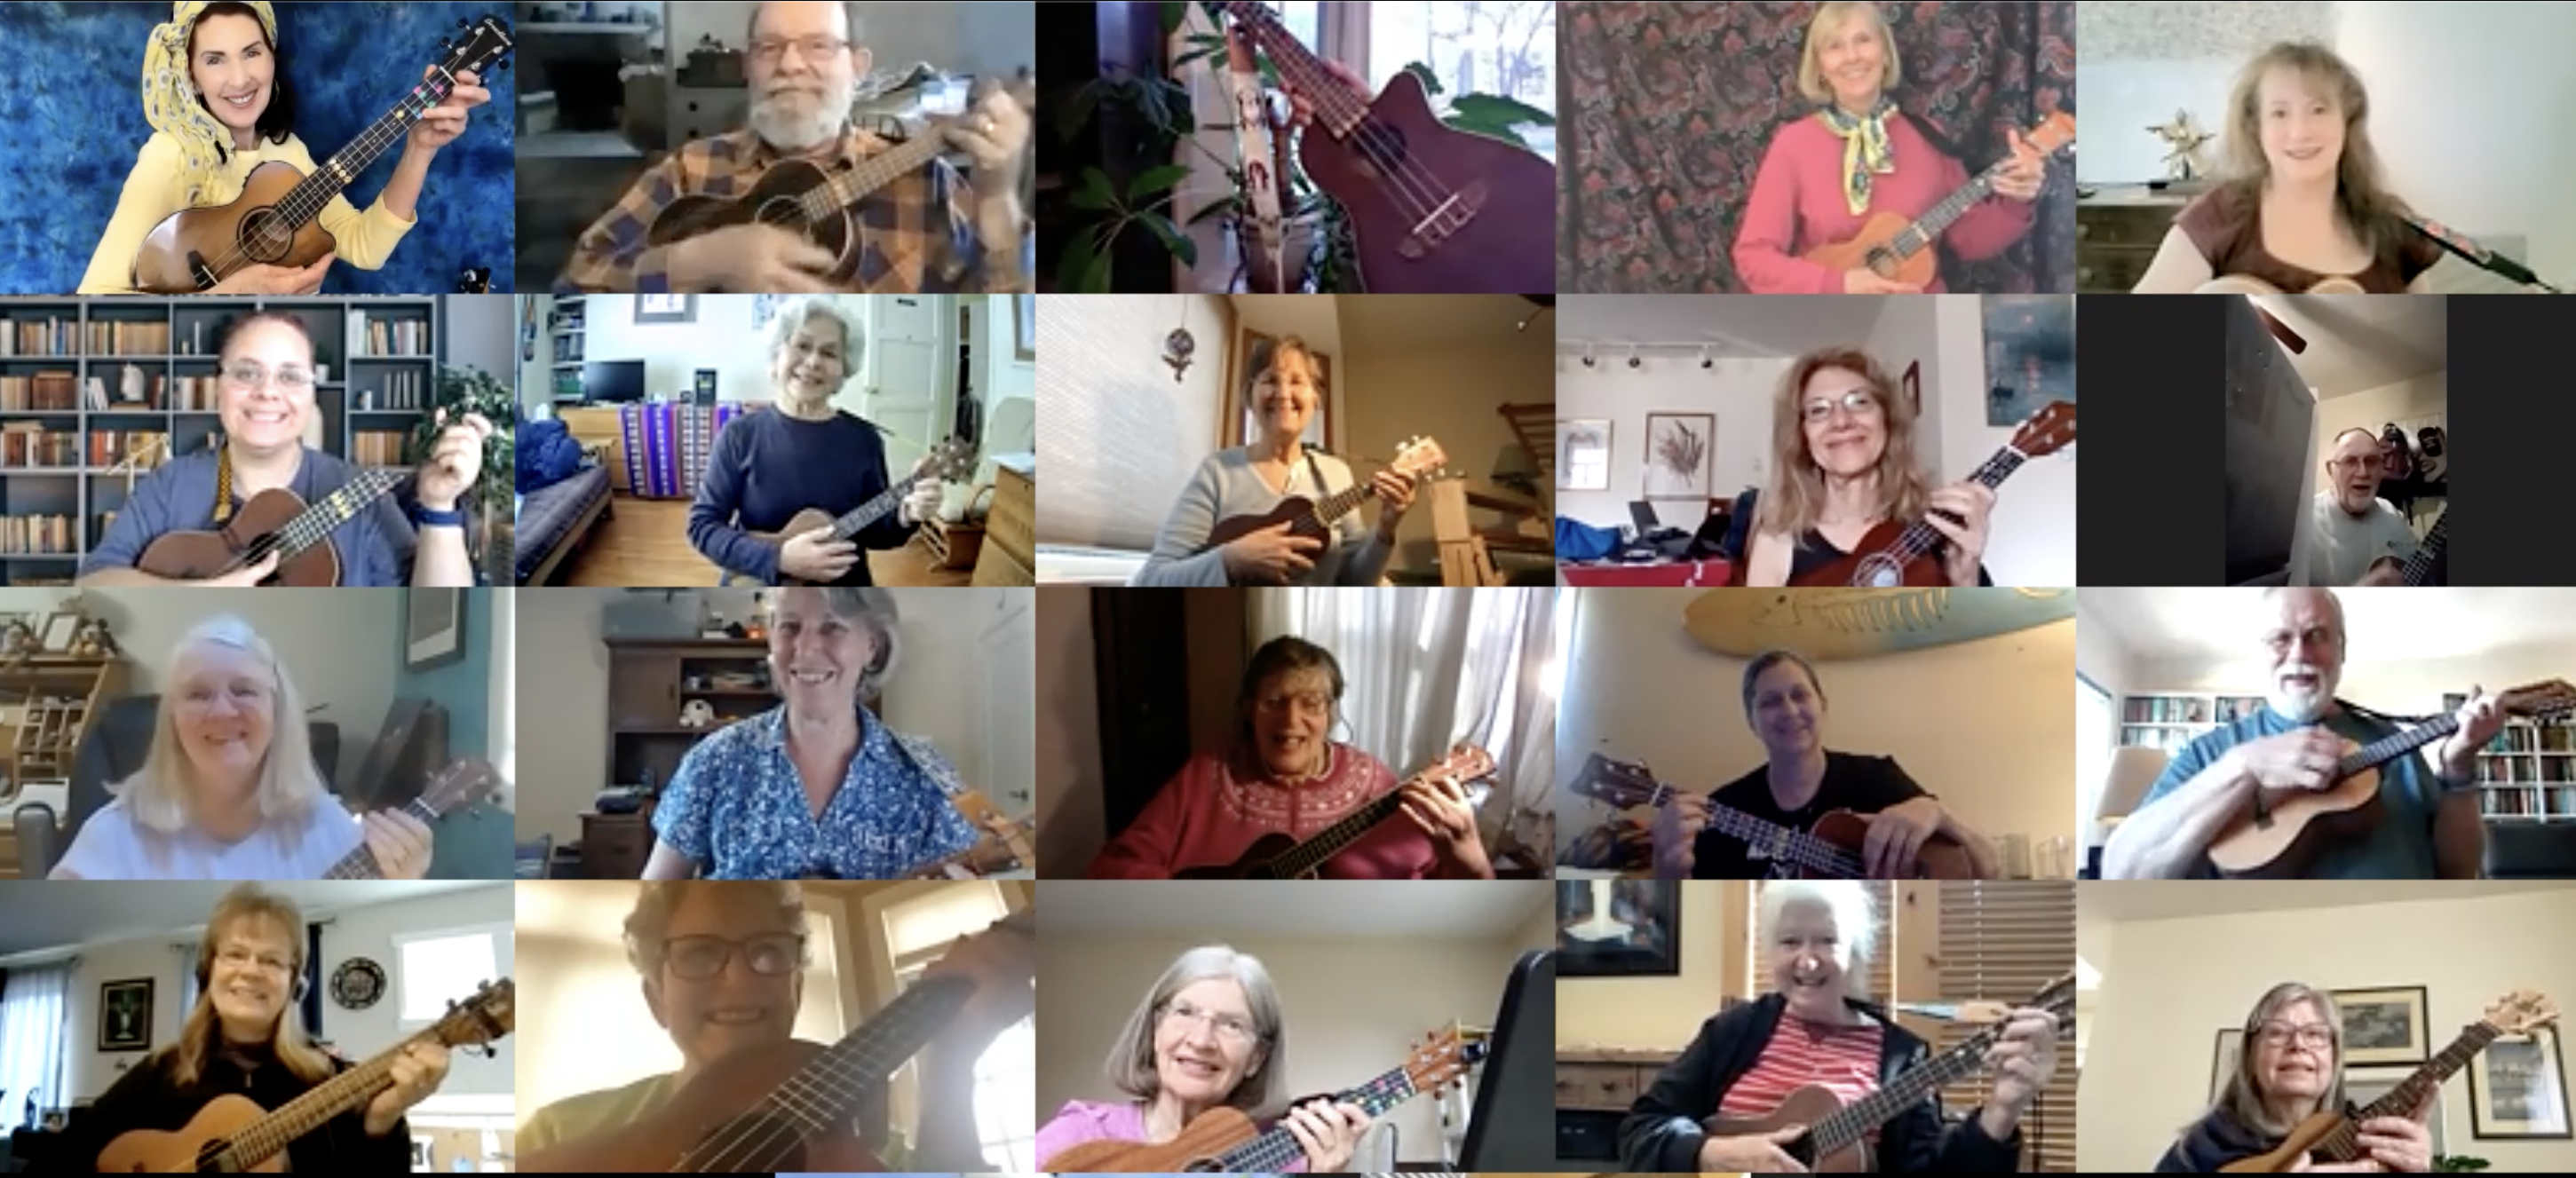 A group online ukulele class picture hosted by Melanie Kareem